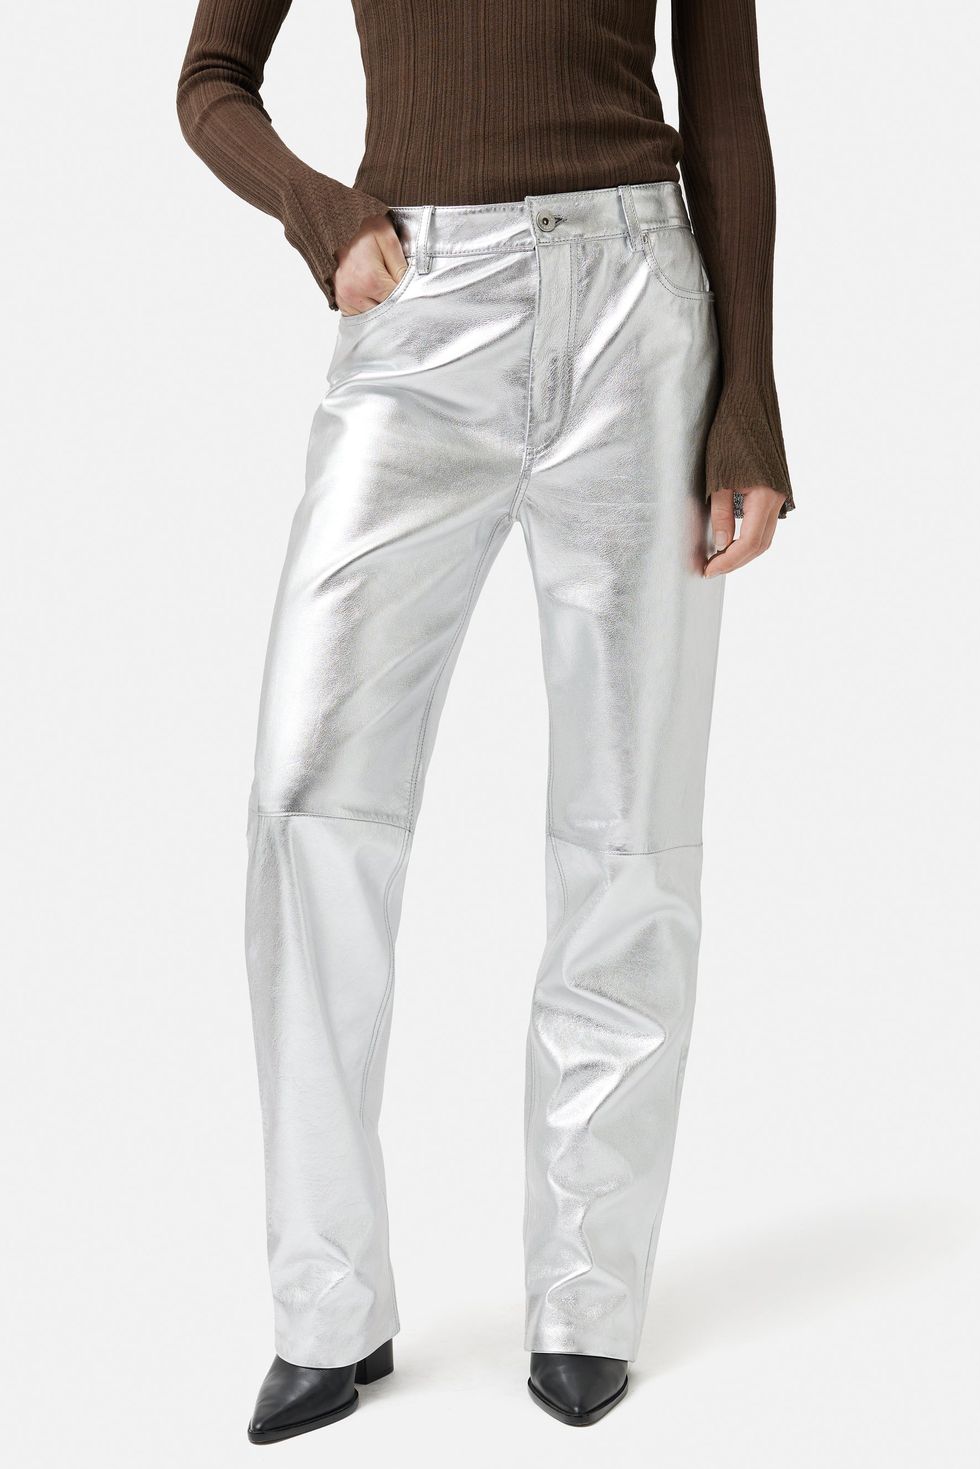 Things you never knew you wanted: a pair of shiny, silver trousers